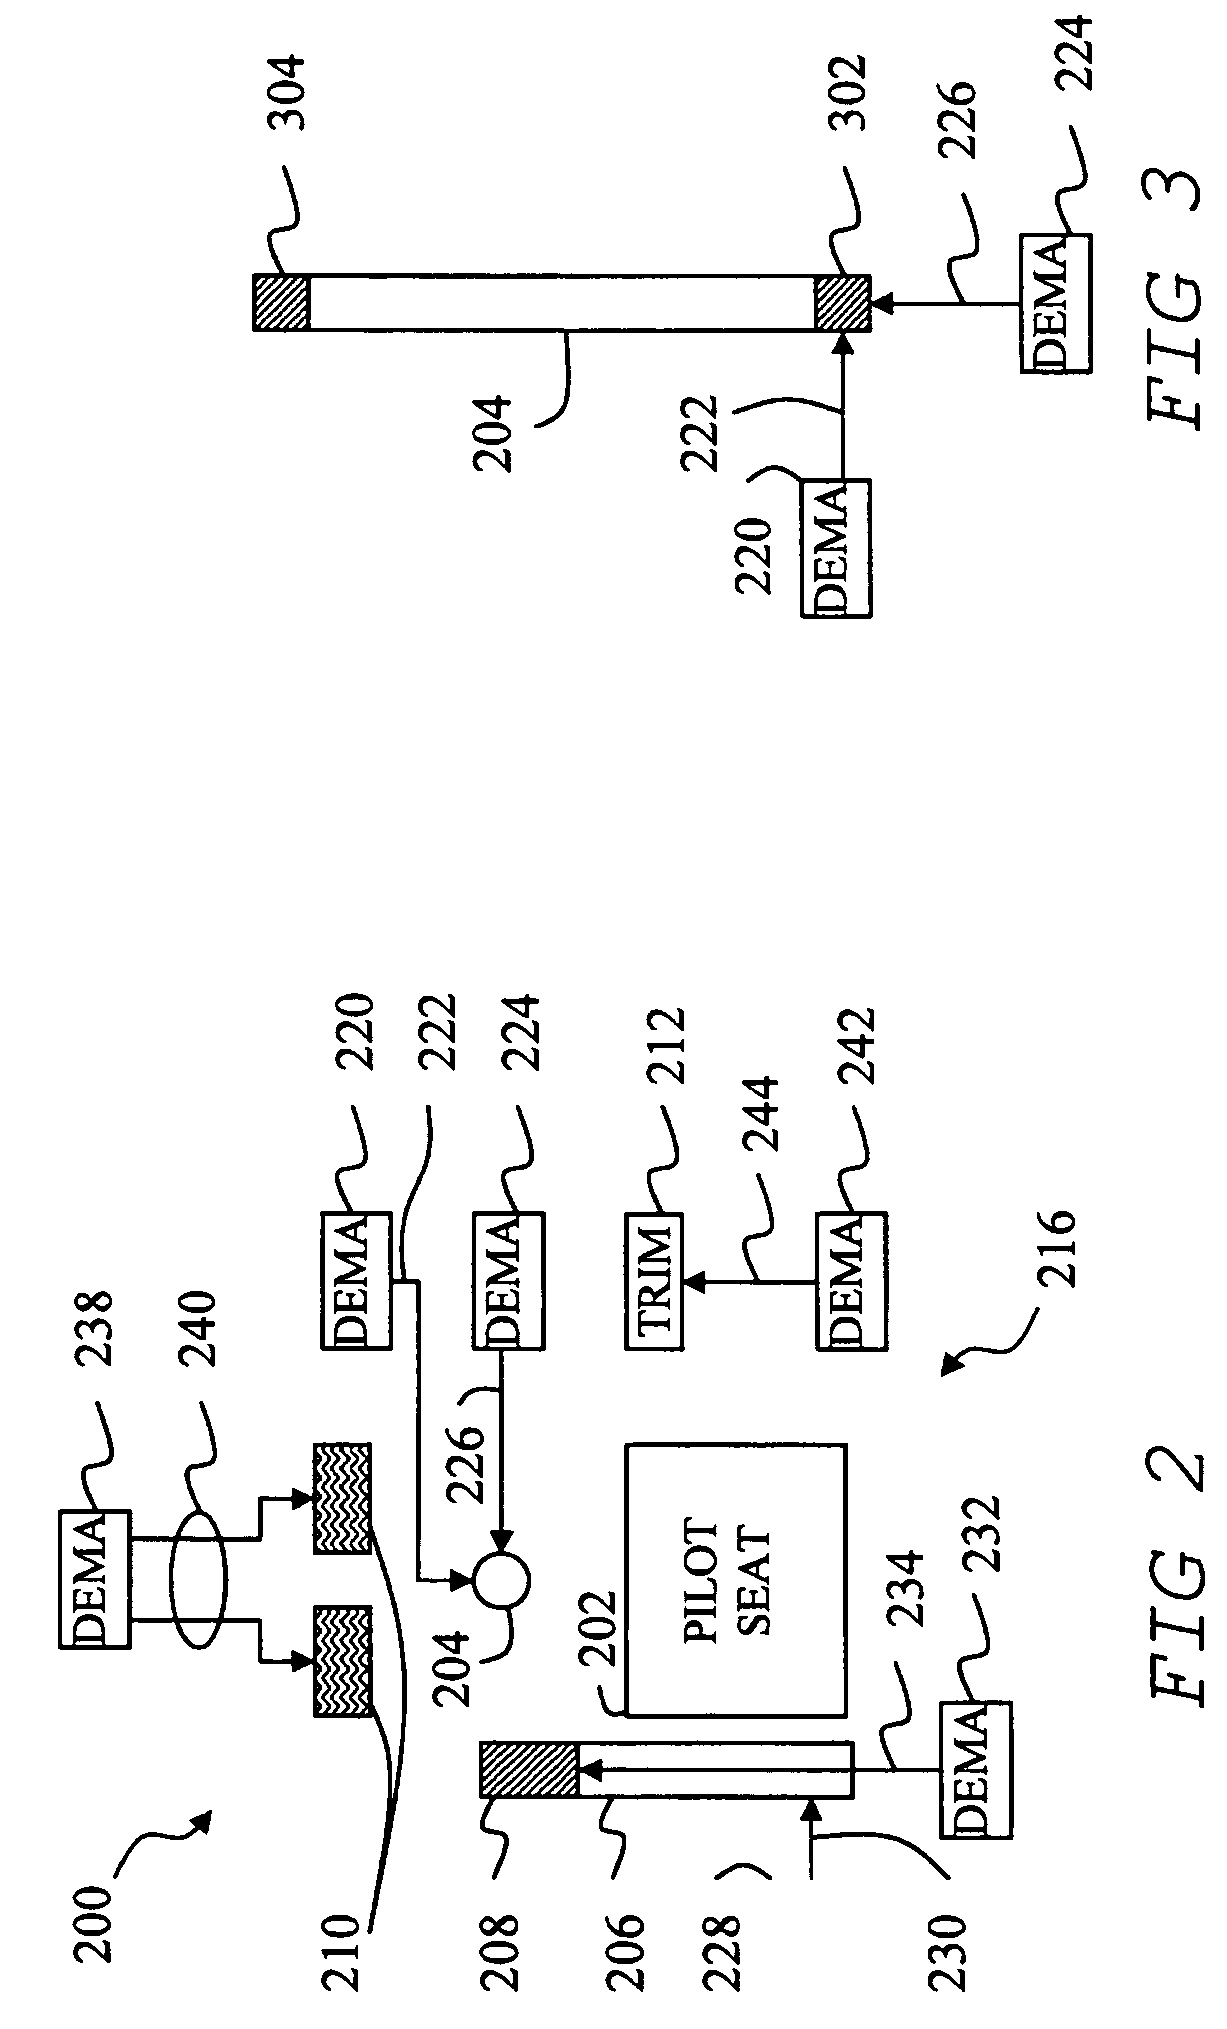 Multi-mode unmanned and manned vehicle systems and methods